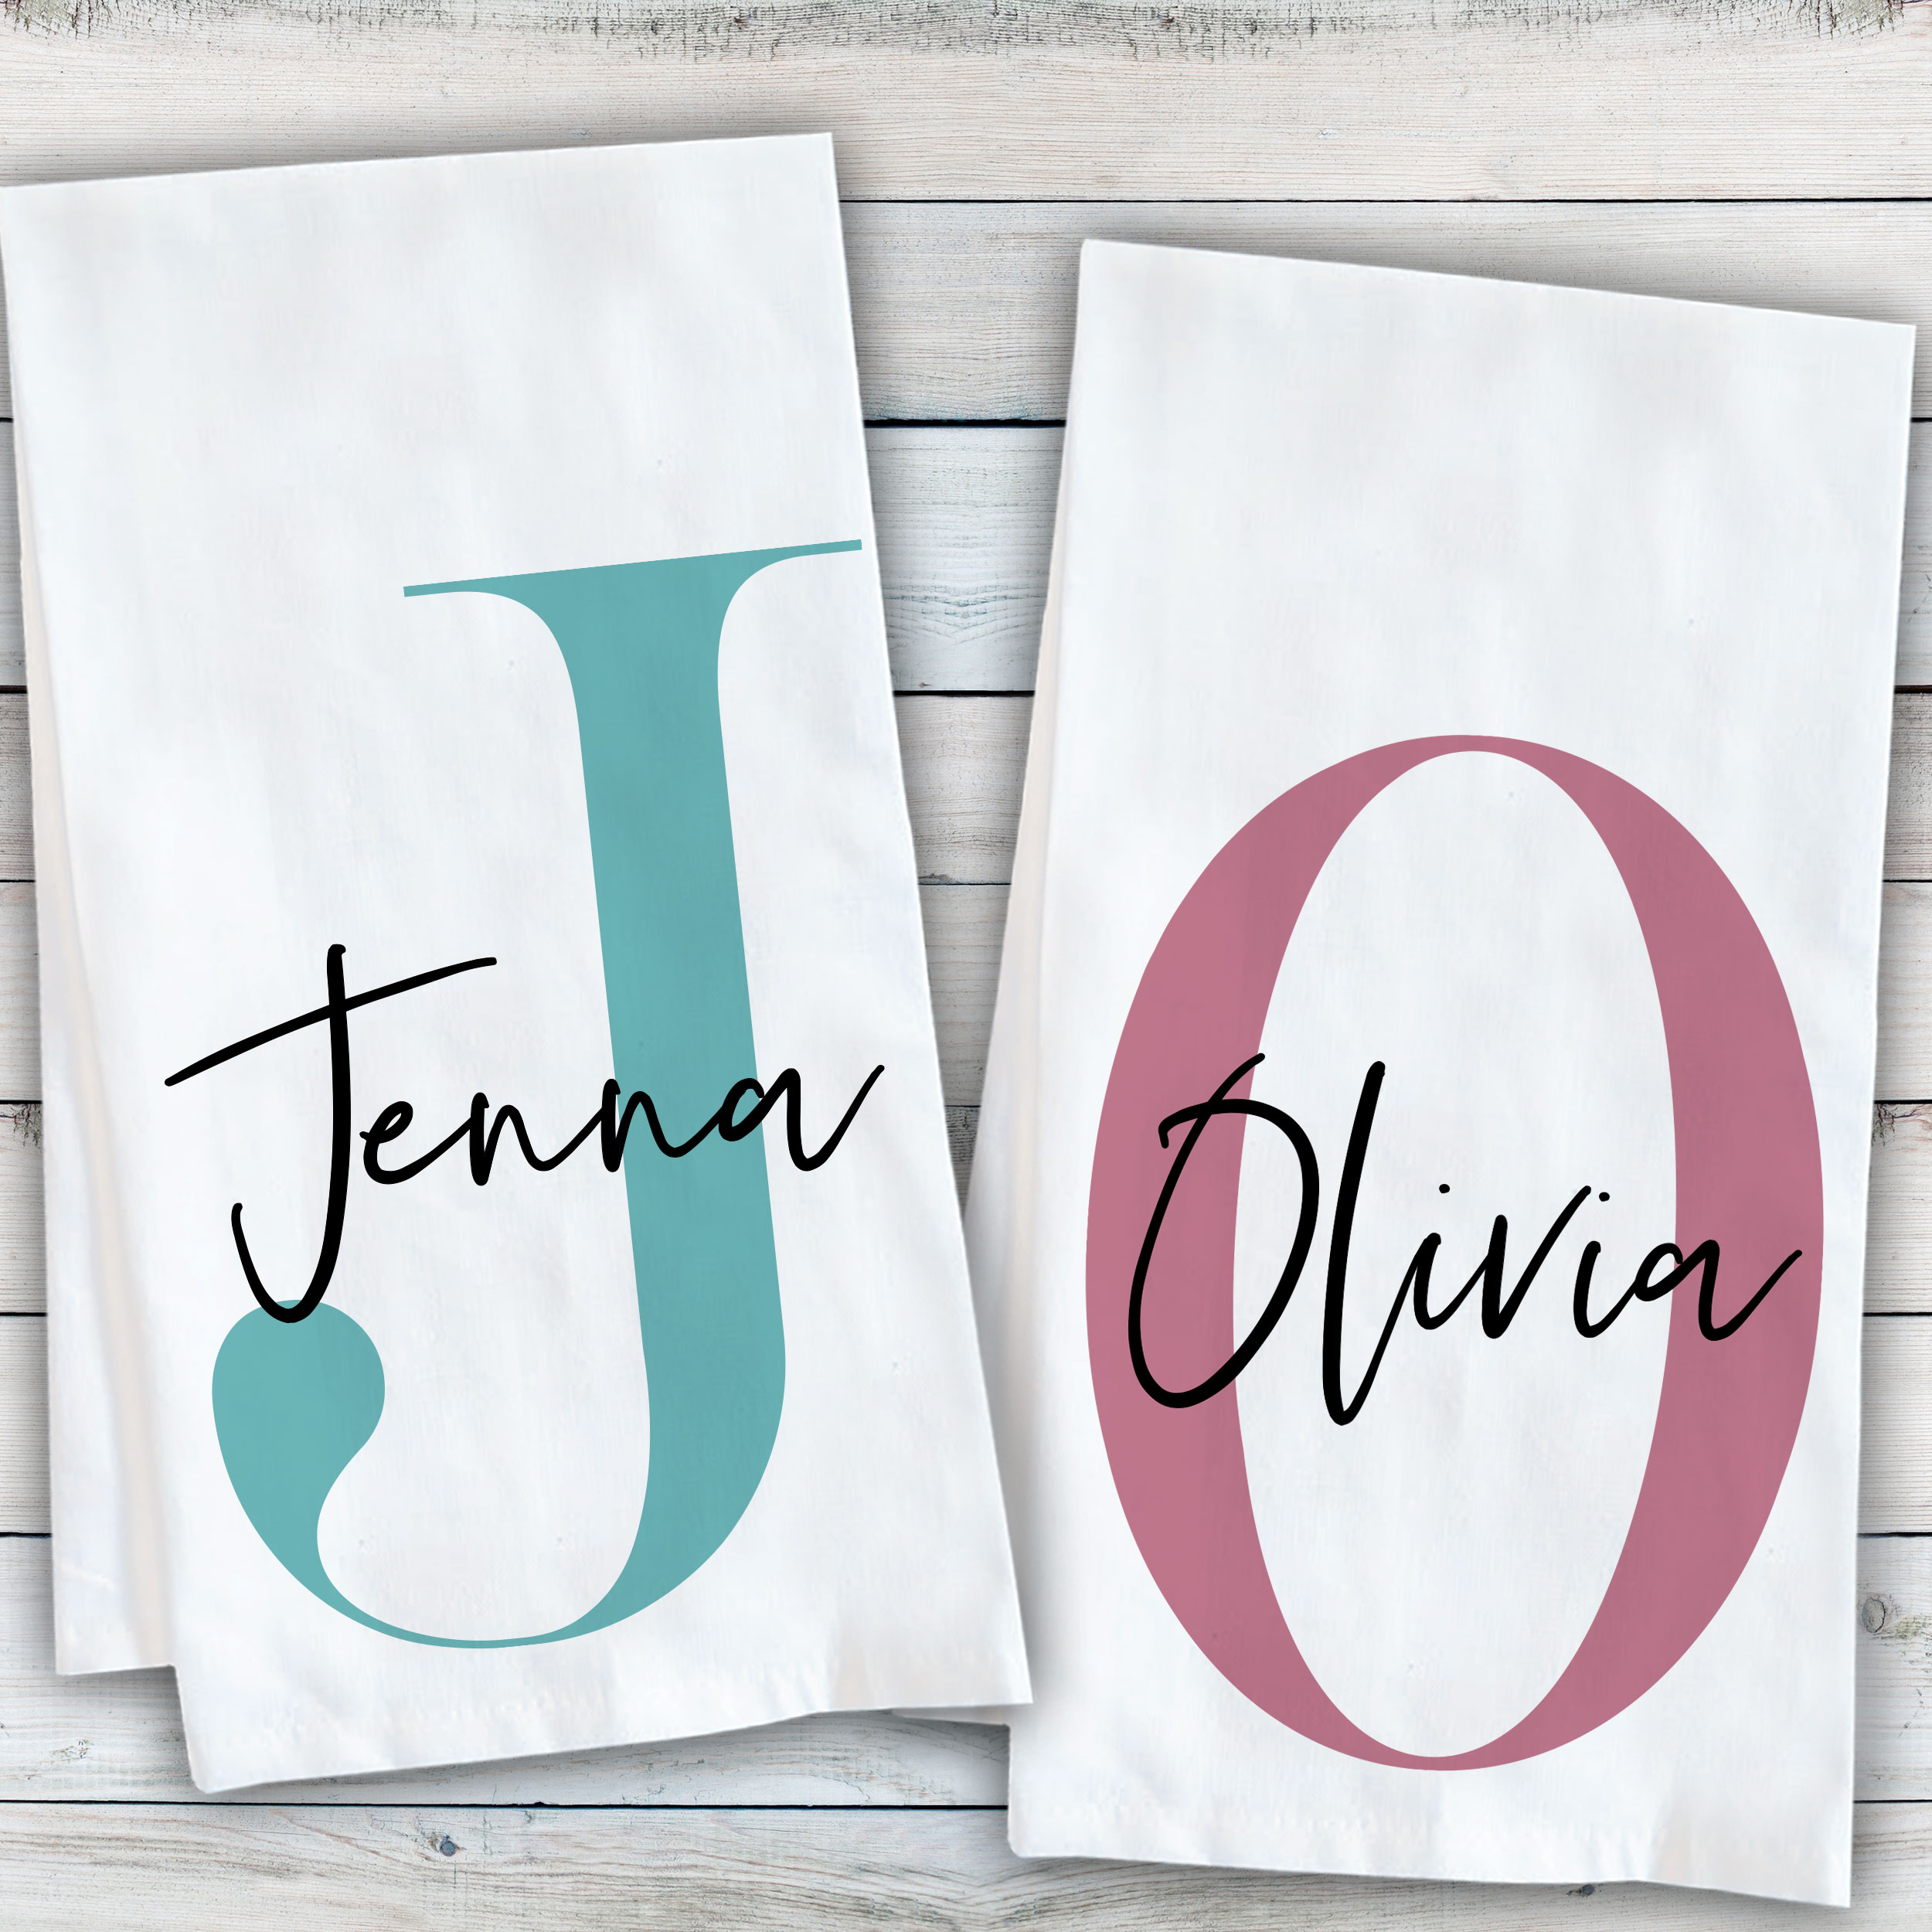 Embroidered Modern Farmhouse Tea Towels with Name – A Gift Personalized